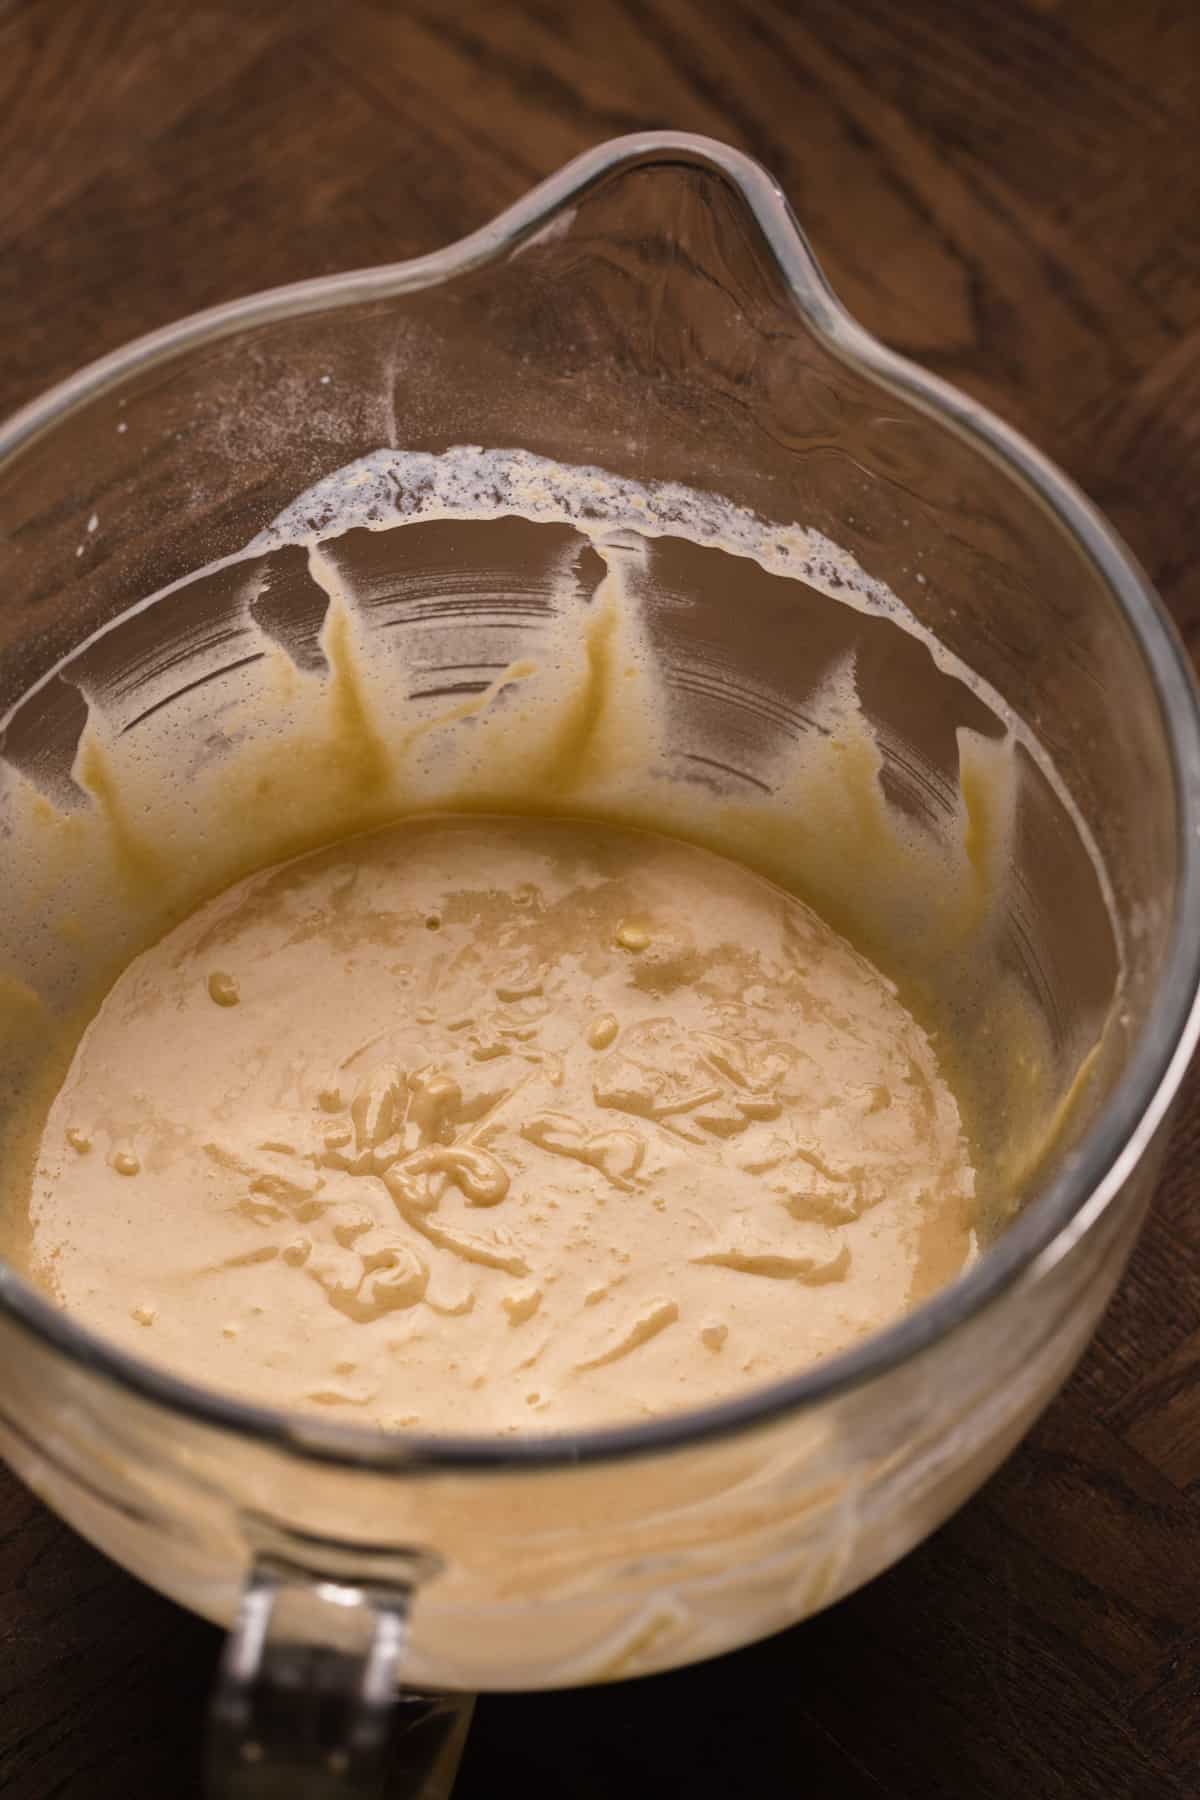 Cake batter in a glass mixing bowl.